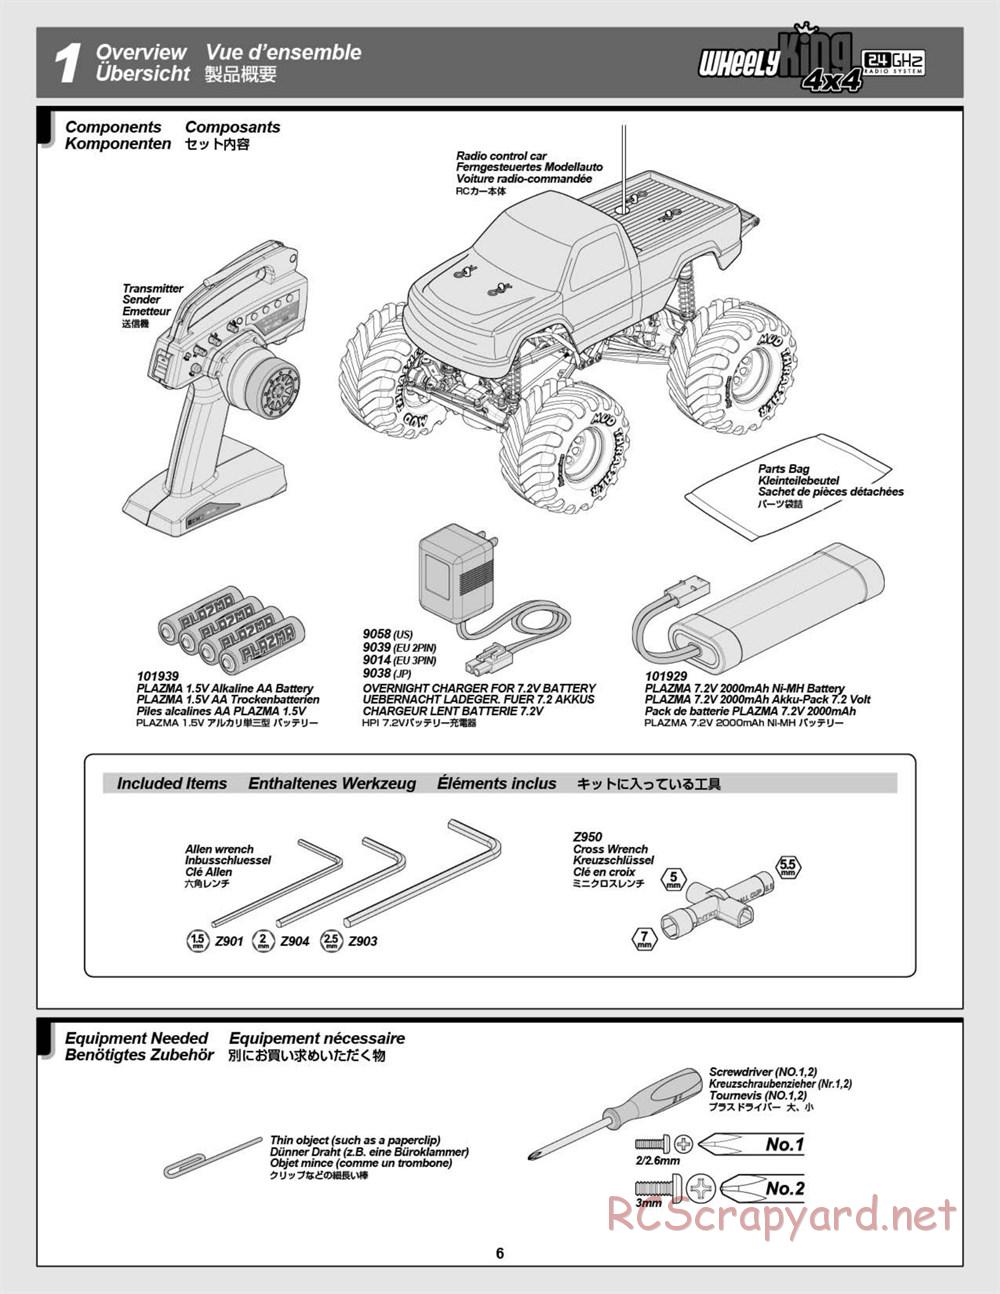 HPI - Wheely King 4x4 - Manual - Page 6